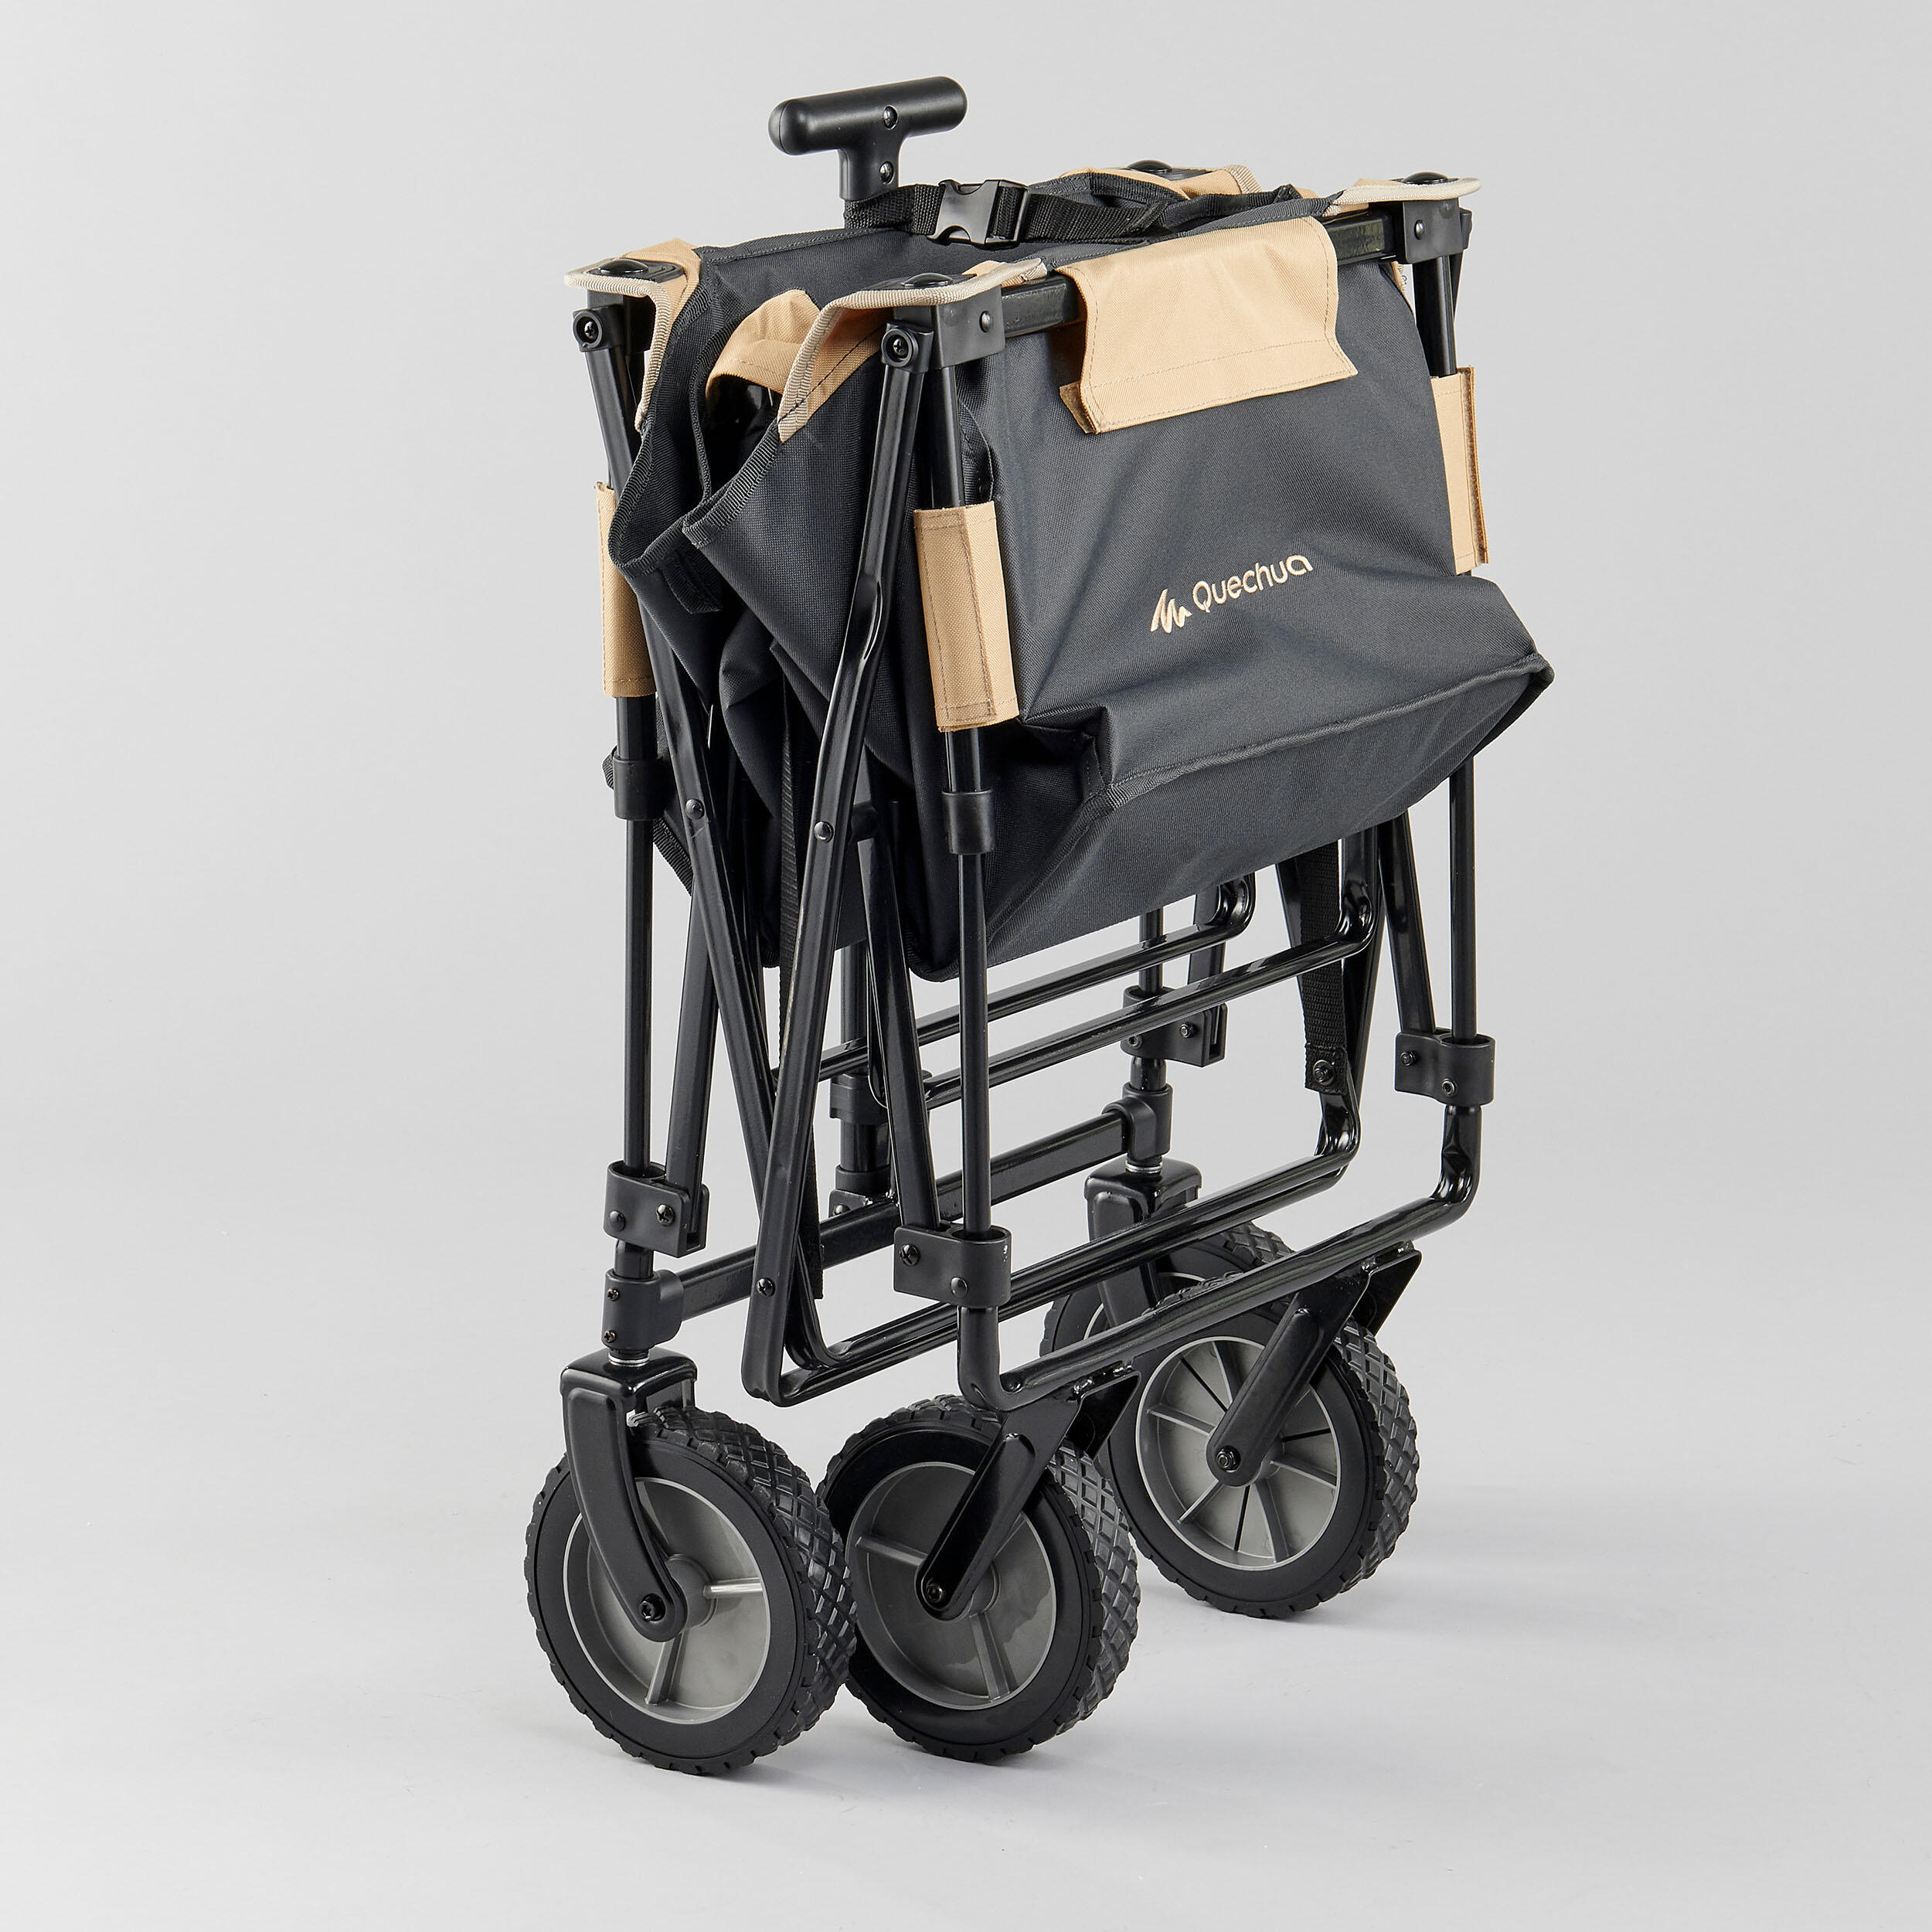 FOLDING TRANSPORT CART FOR CAMPING EQUIPMENT - TROLLEY 5/10